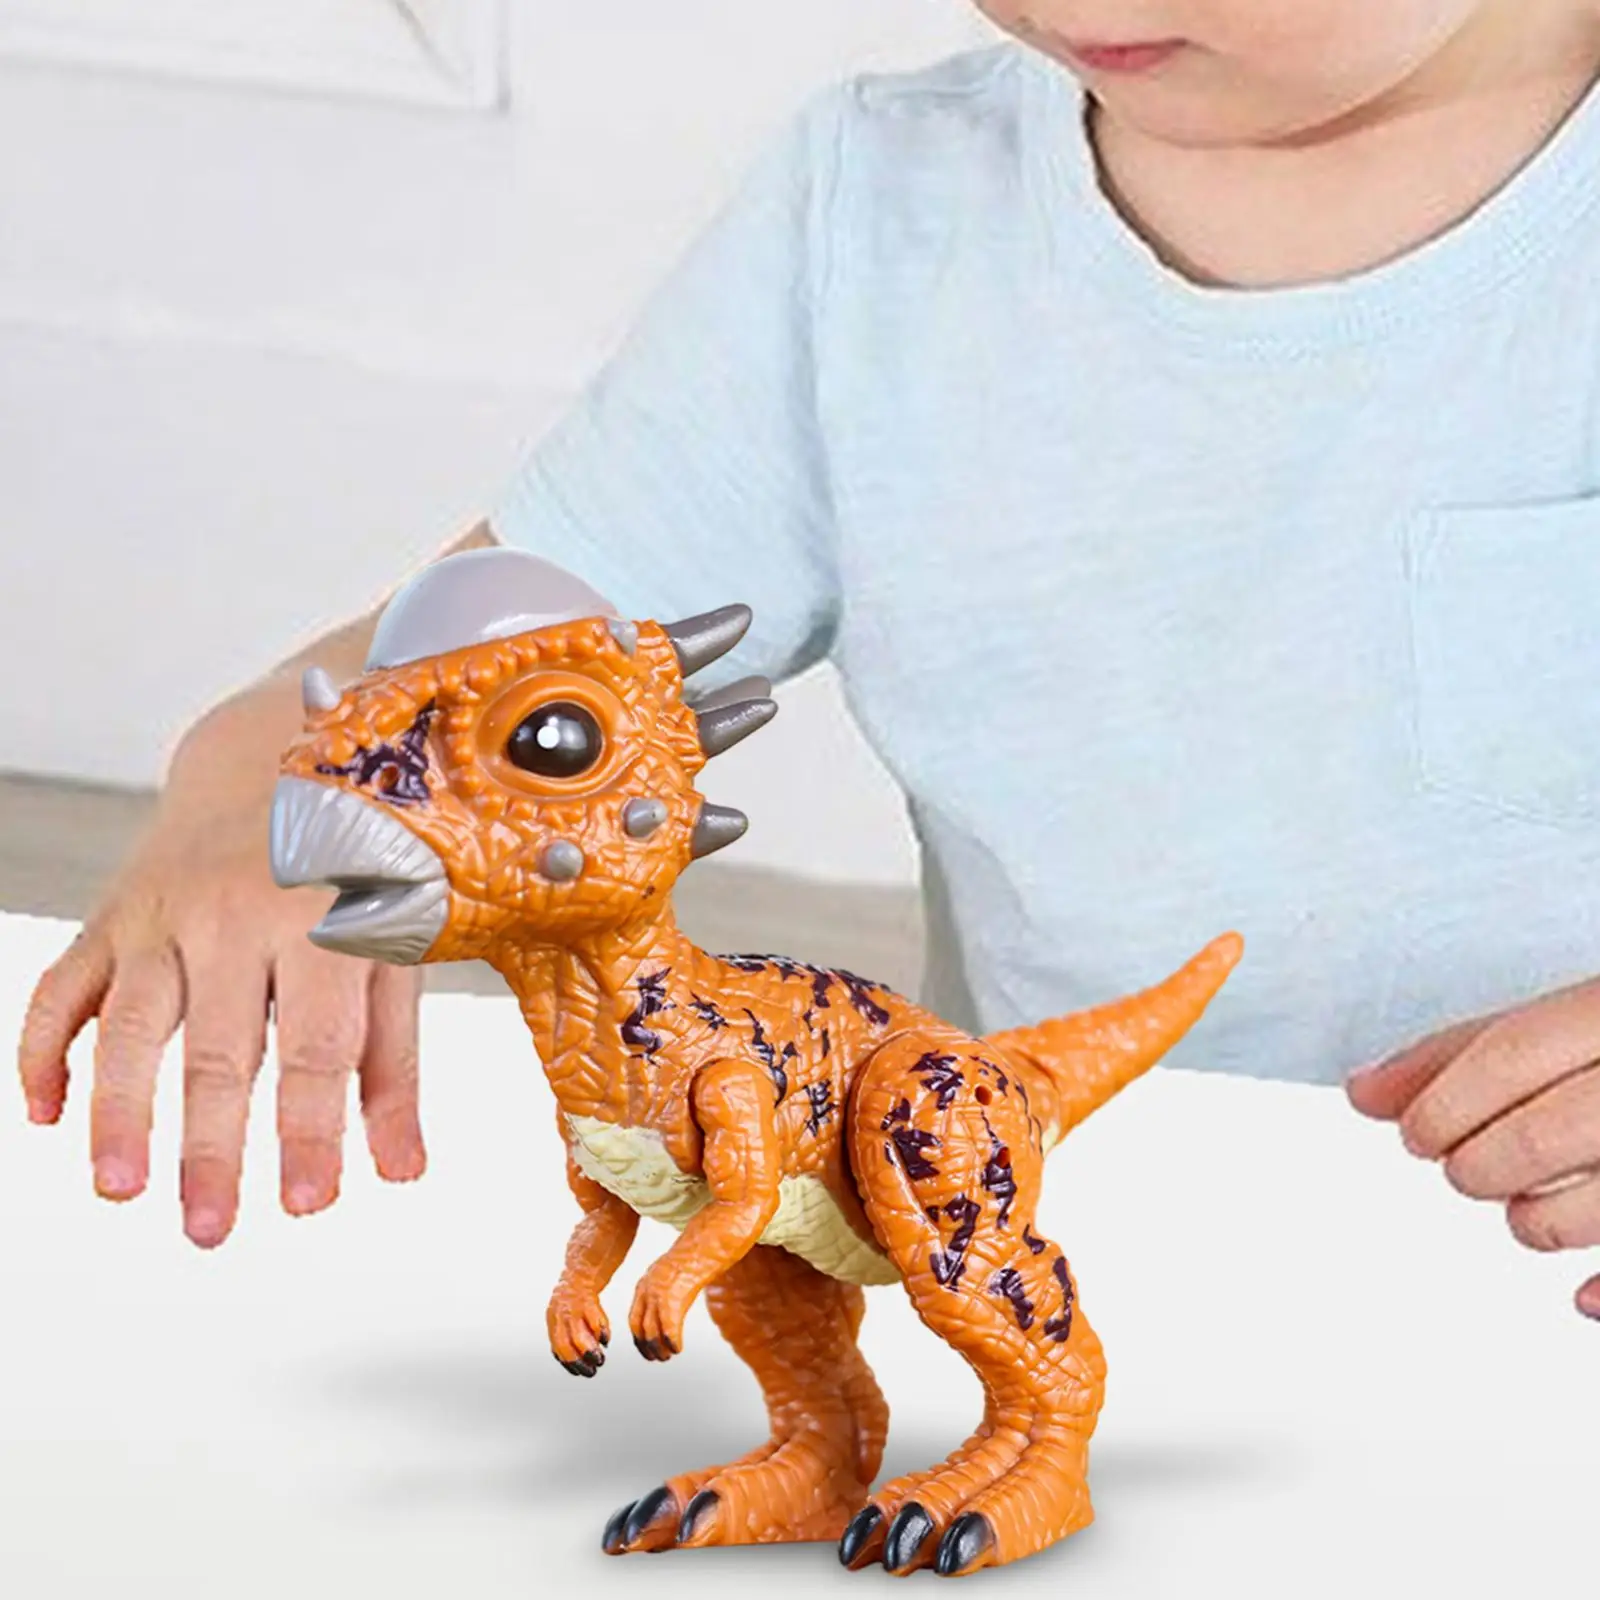 Dinosaur Action Figure Toy Animal Model for Travel Role Play Birthday Gift